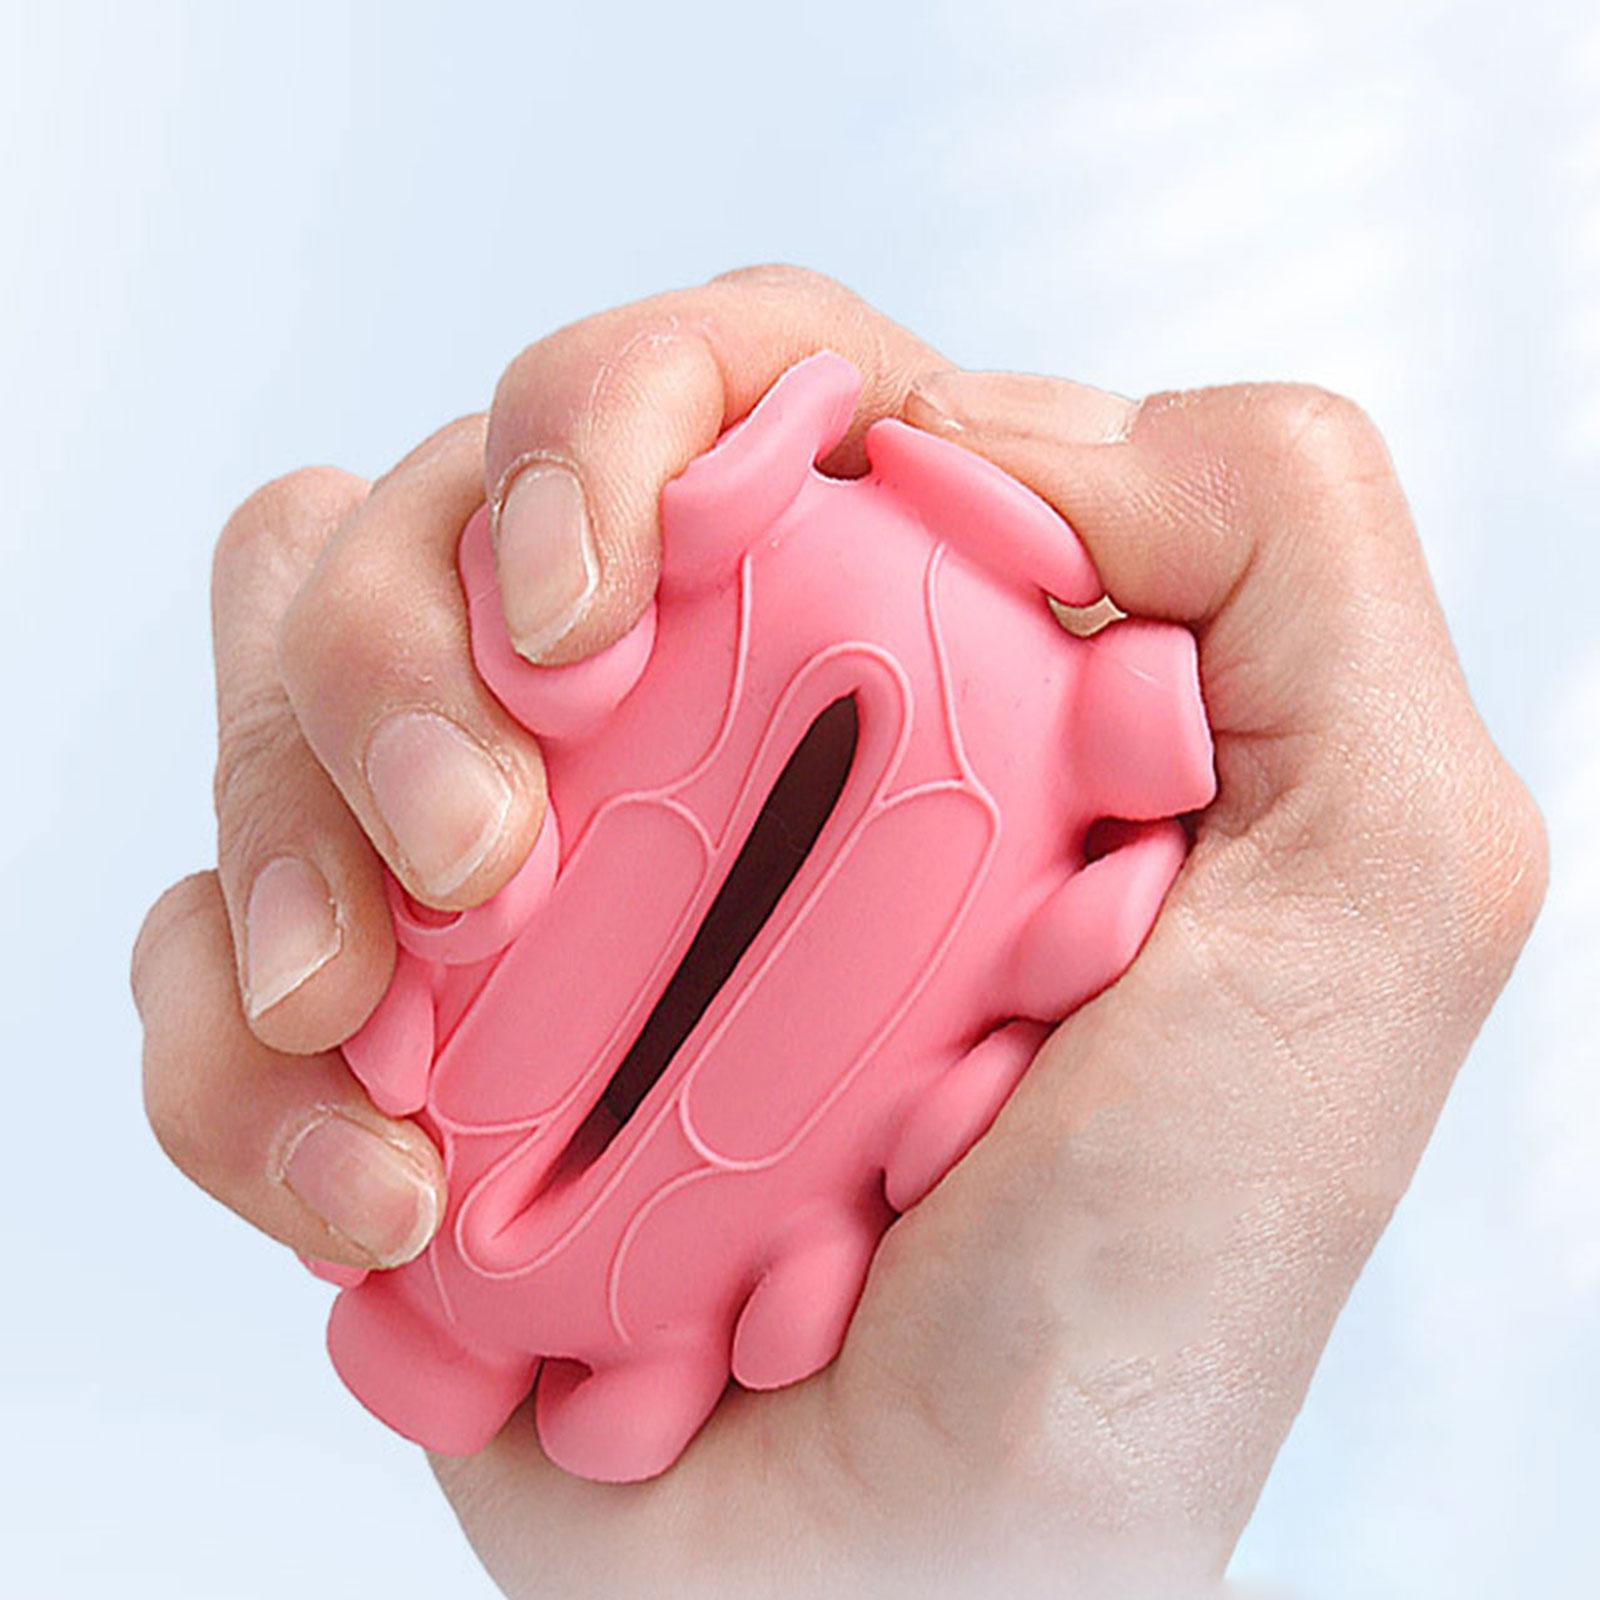 Hand Grip Strengthener Muscle Training for Home Gym Sports Workout Pink 20 to 30LB